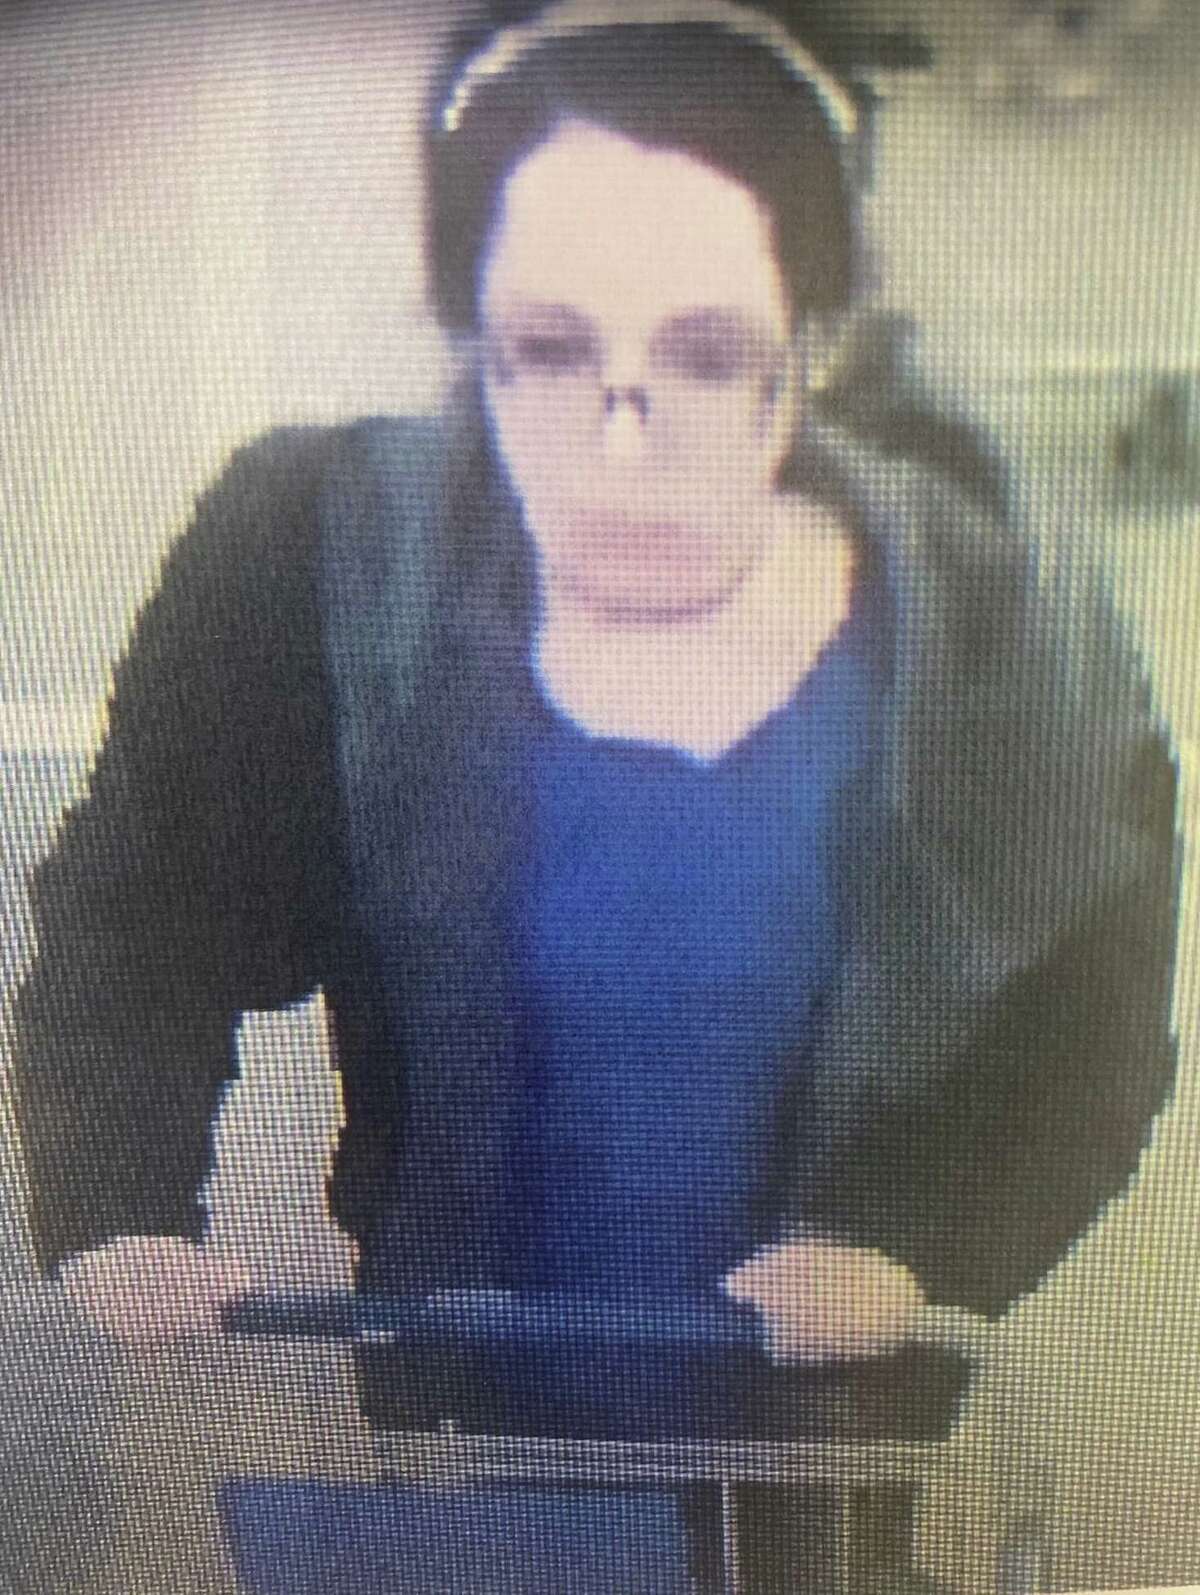 Police are looking to identify this woman, who they say stole $173 worth of beer from ShopRite in Southbury, Conn.